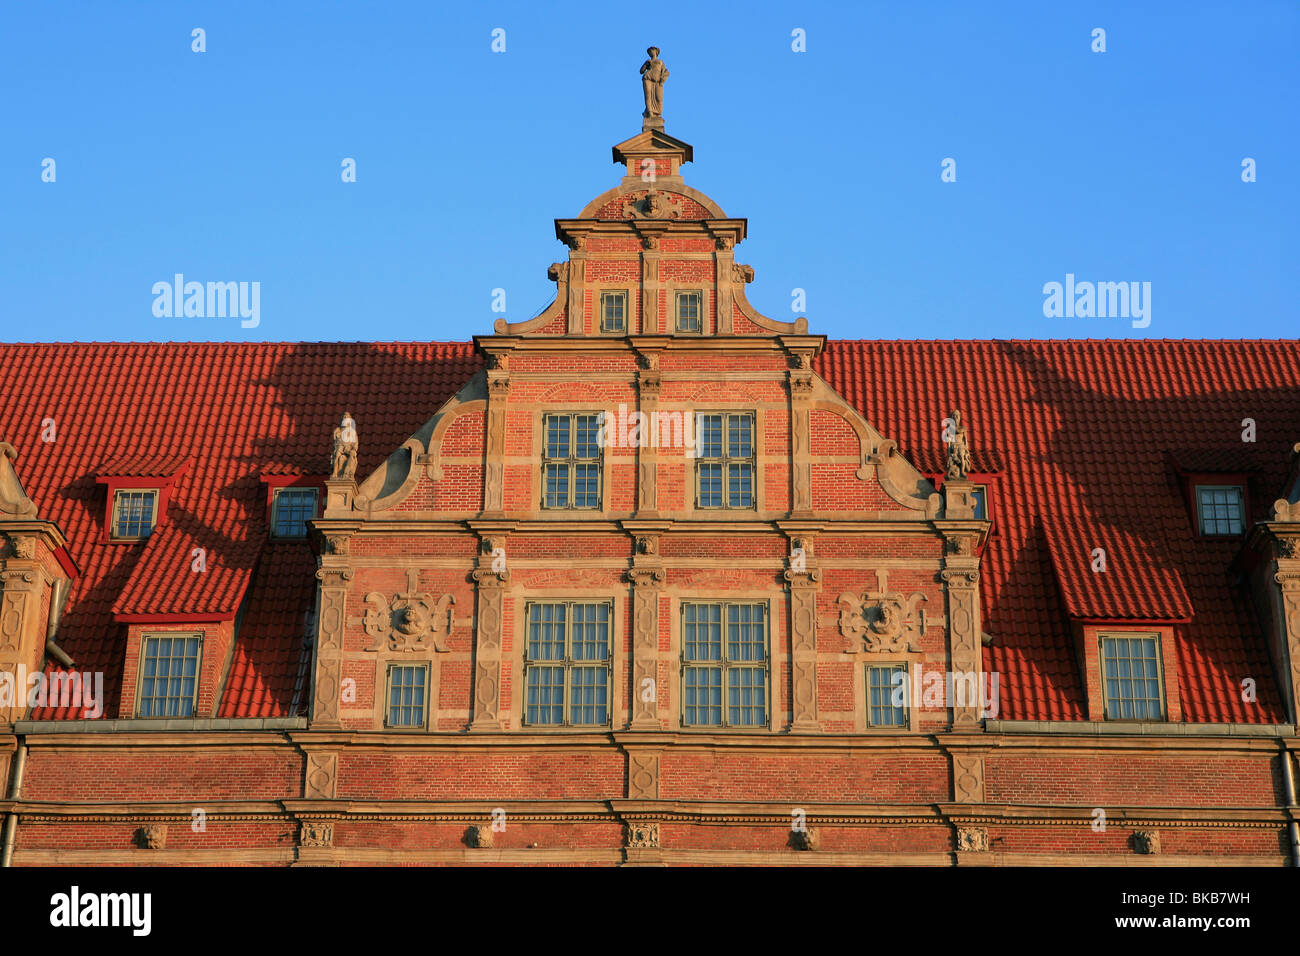 Close-up of the Green Gate (former residence of the Polish kings) in 16th century mannerist style at Gdansk, Poland Stock Photo